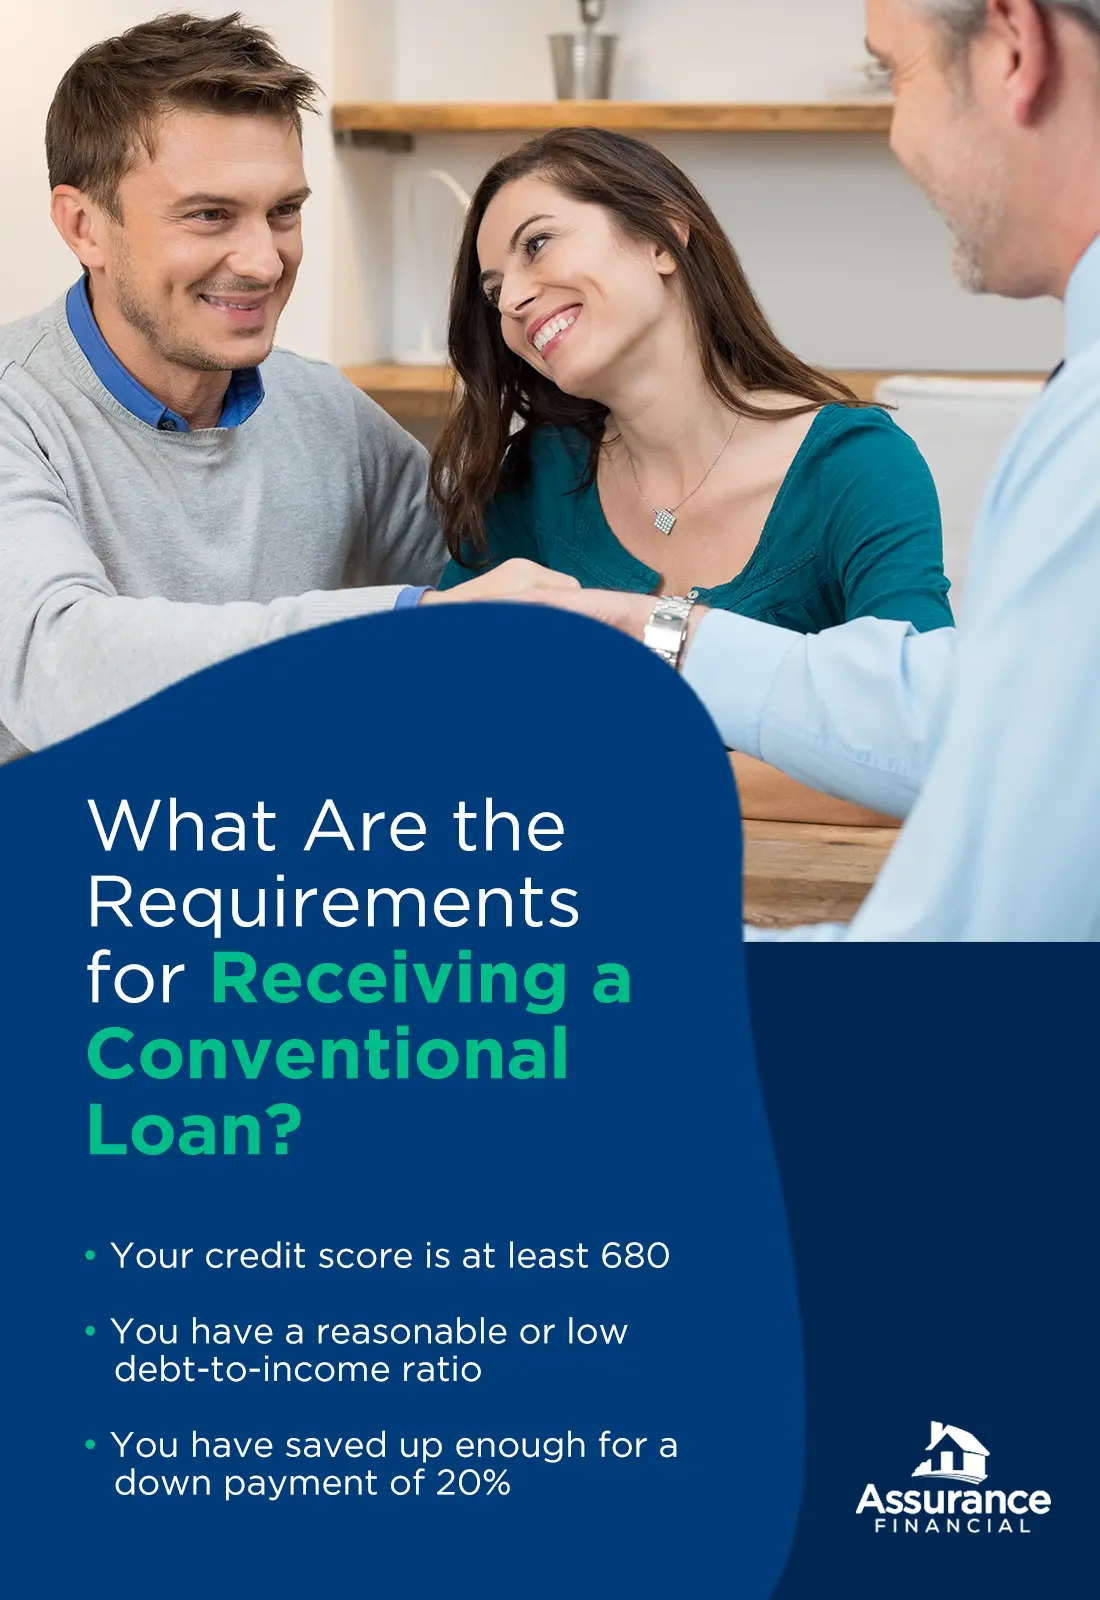 Conventional loan requirements